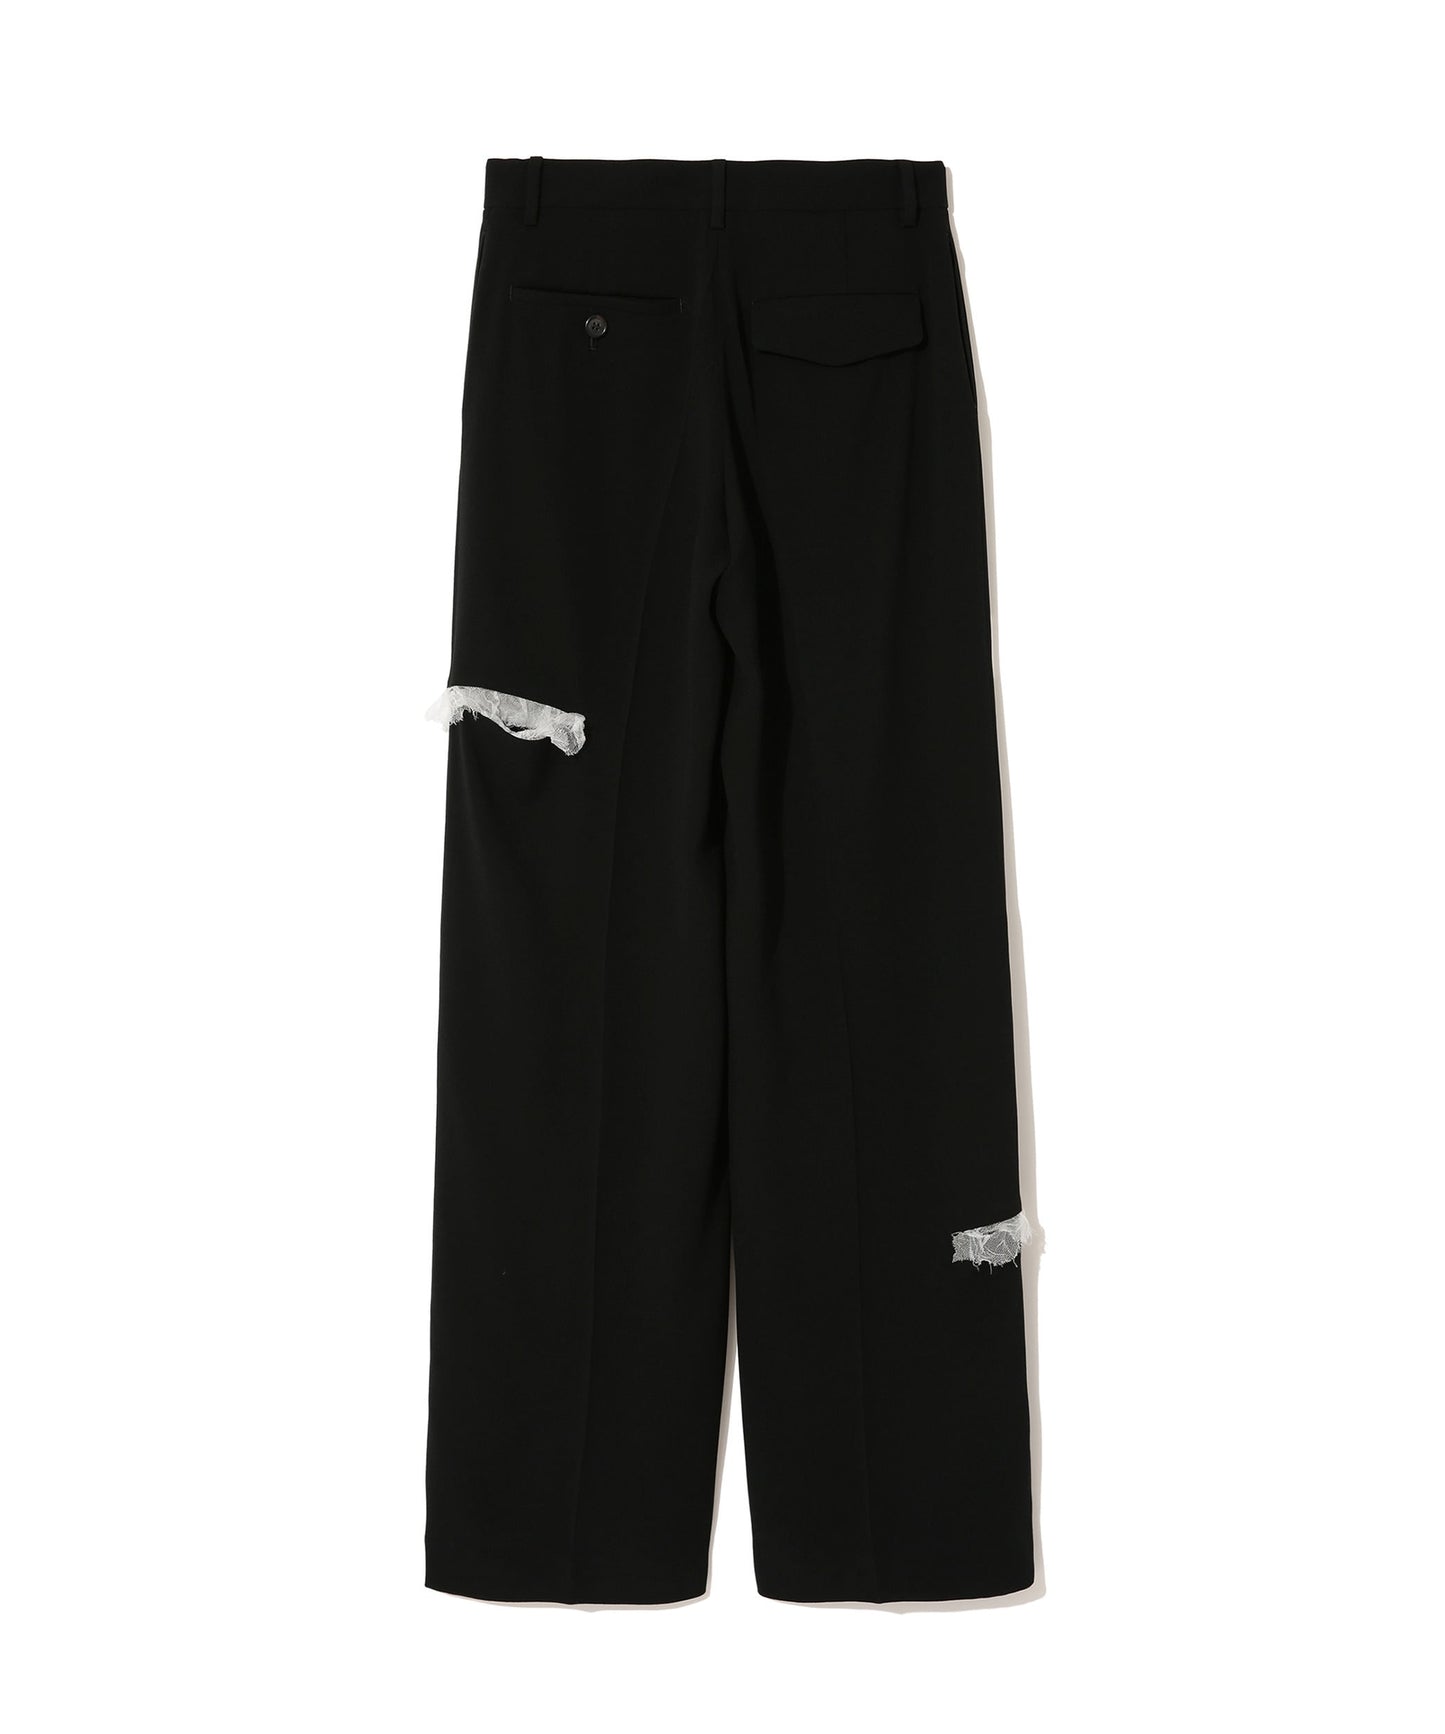 Undercover Black Detailed Trousers